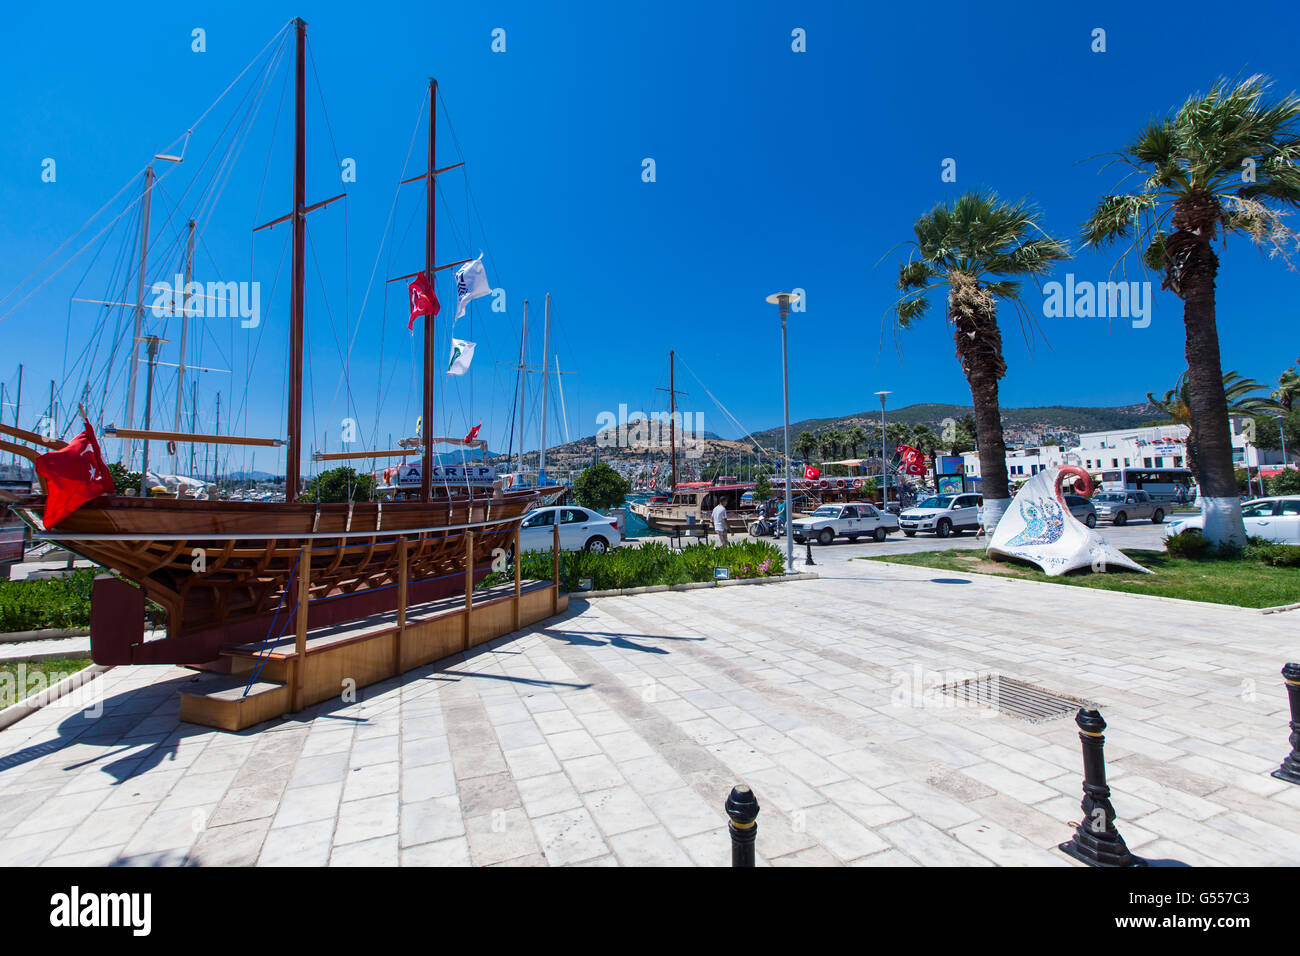 BODRUM, TURKEY - JUNE 24, 2015: Unidentified people on the street of Bodrum, Turkey. Bodrum is known for its beaches, resorts, a Stock Photo